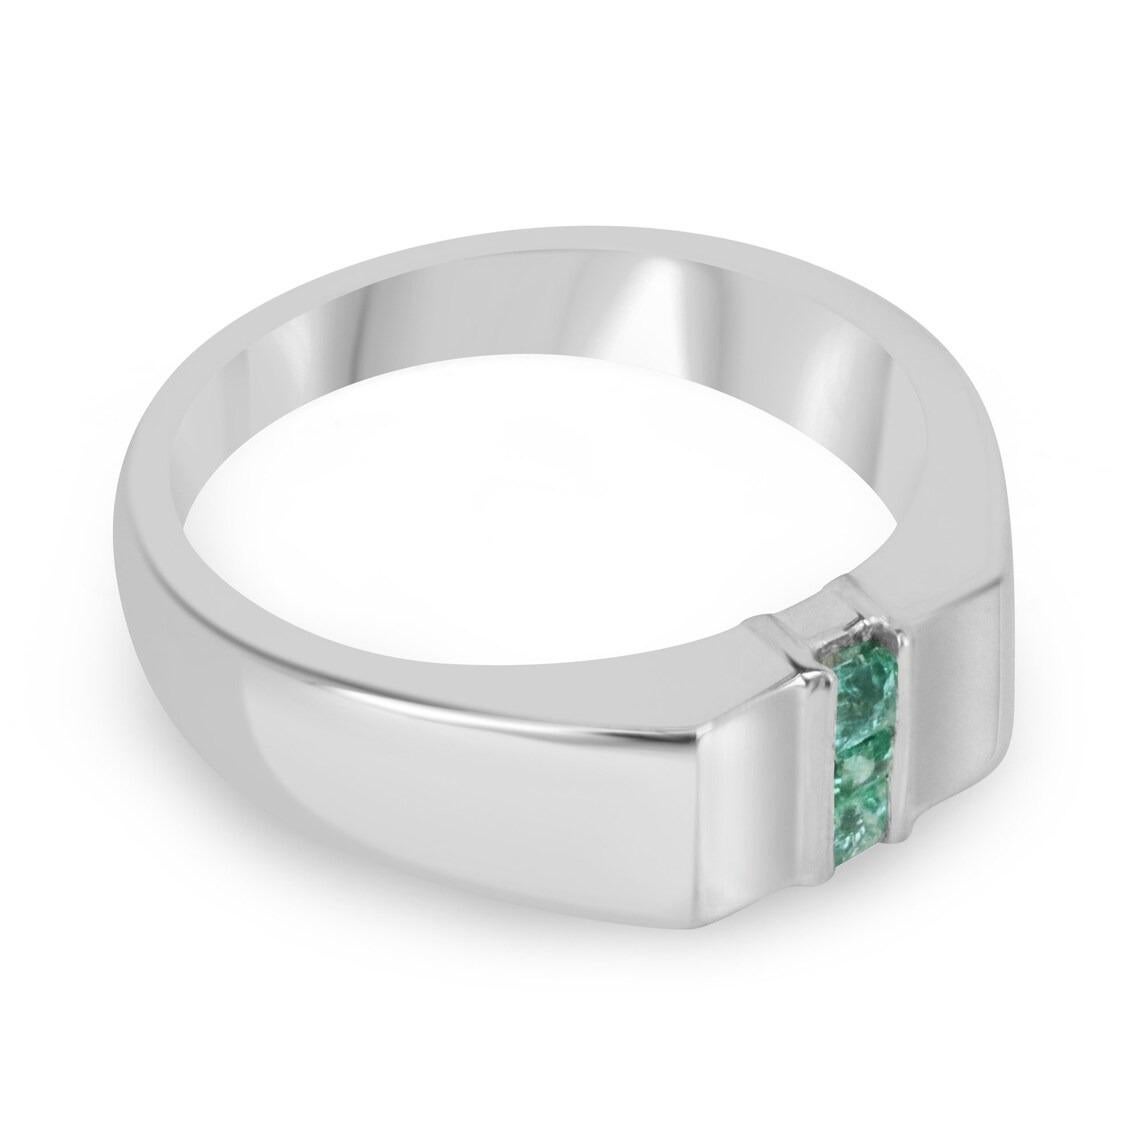 A dapper three-stone natural emerald men's ring that features three Asscher cut emeralds in the very center channel set north to south. The gemstones showcase a lovely medium green color with excellent-very good clarity and luster. Crafted in